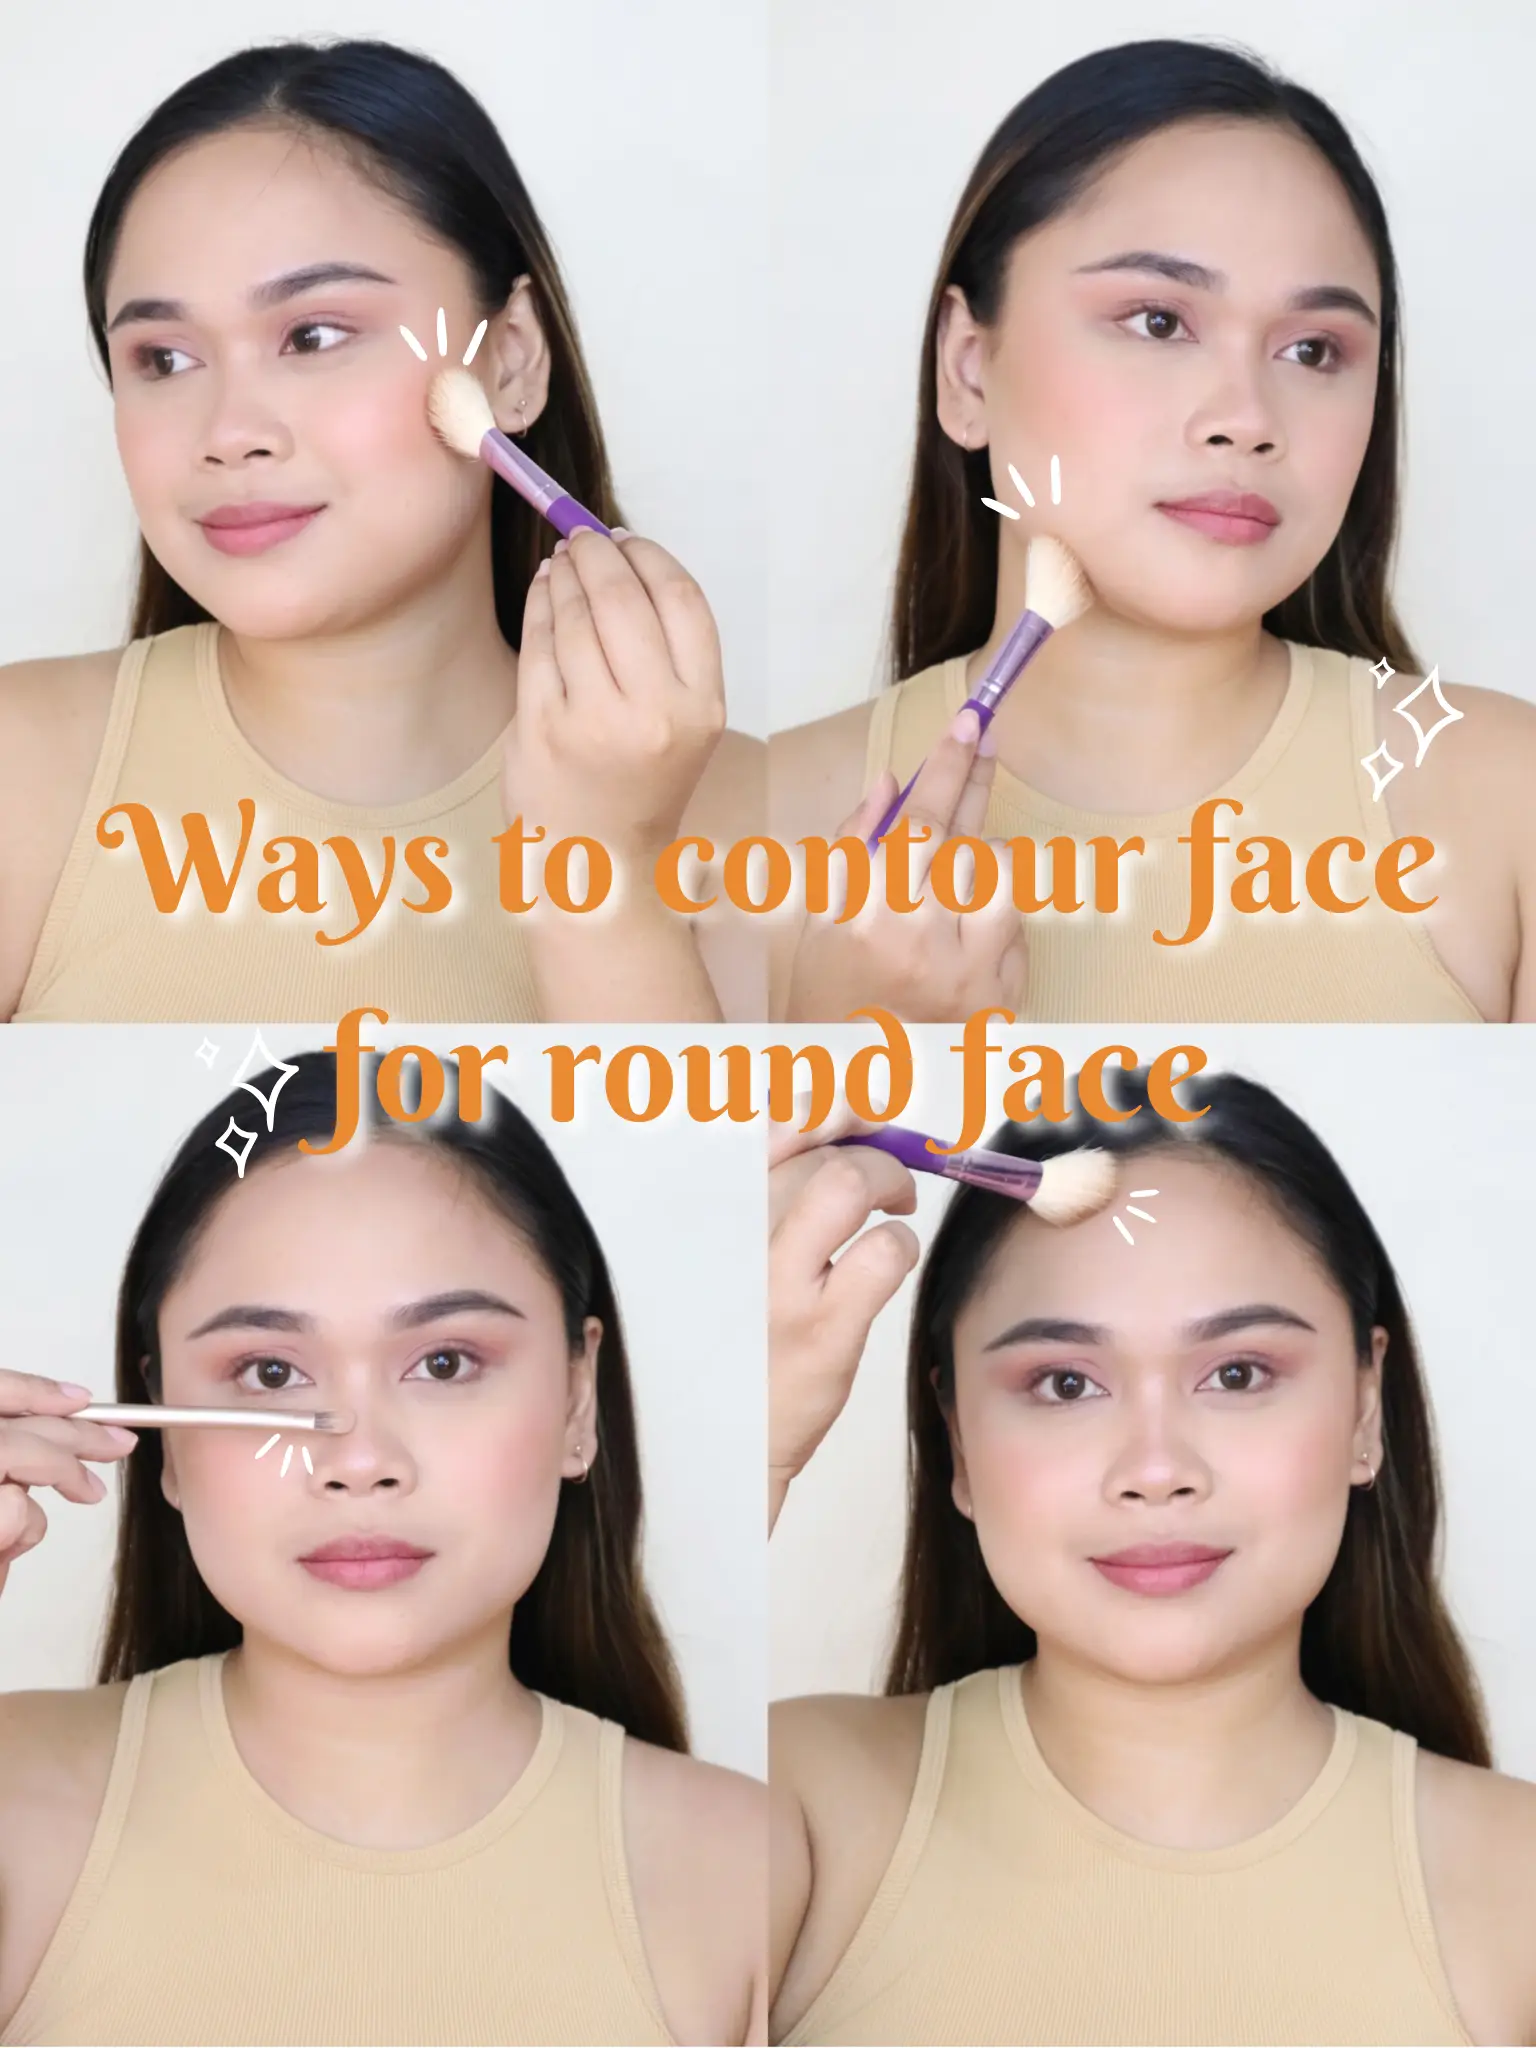 HOW TO CONTOUR ROUND FACE 